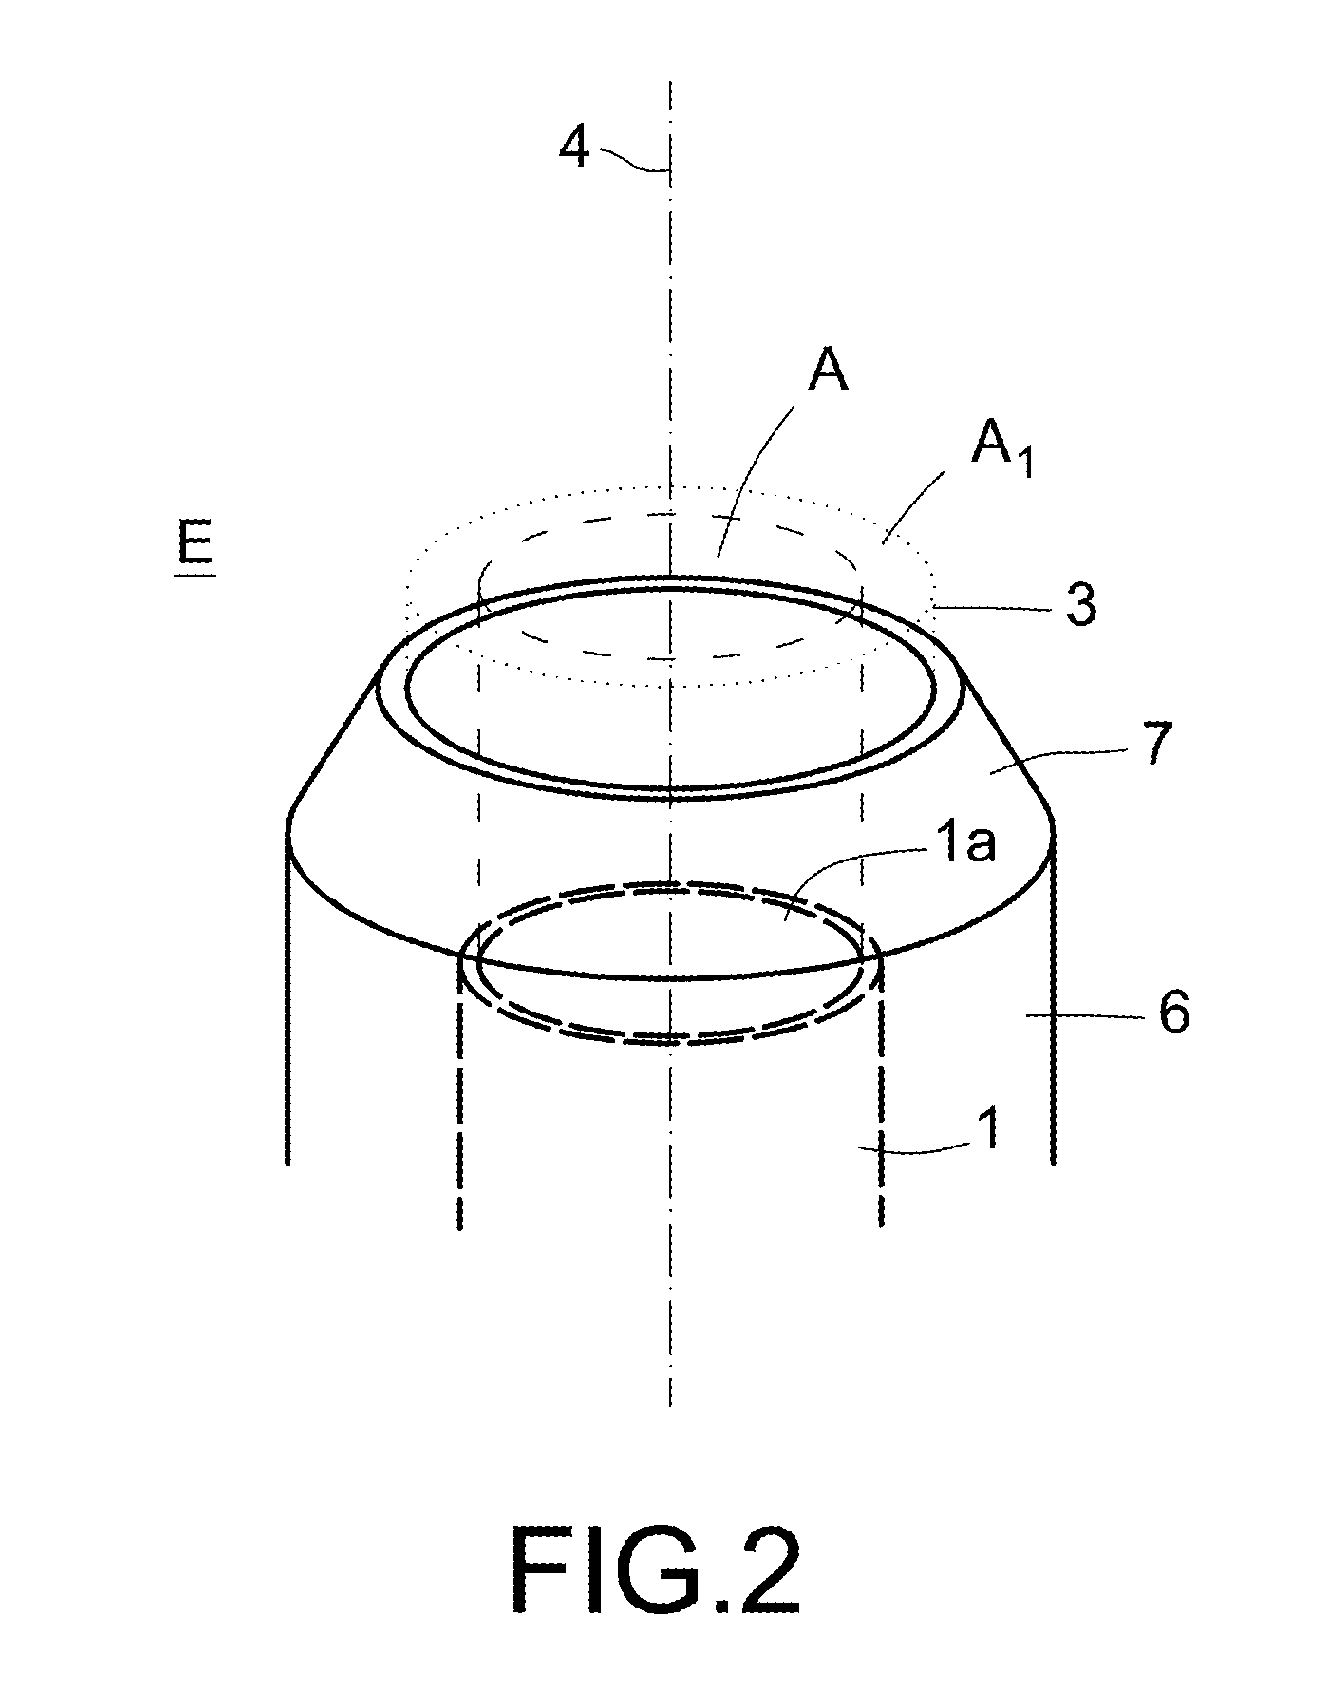 Method and System for Reducing the Visibility of a Plume Created at the Outlet of an Industrial Process